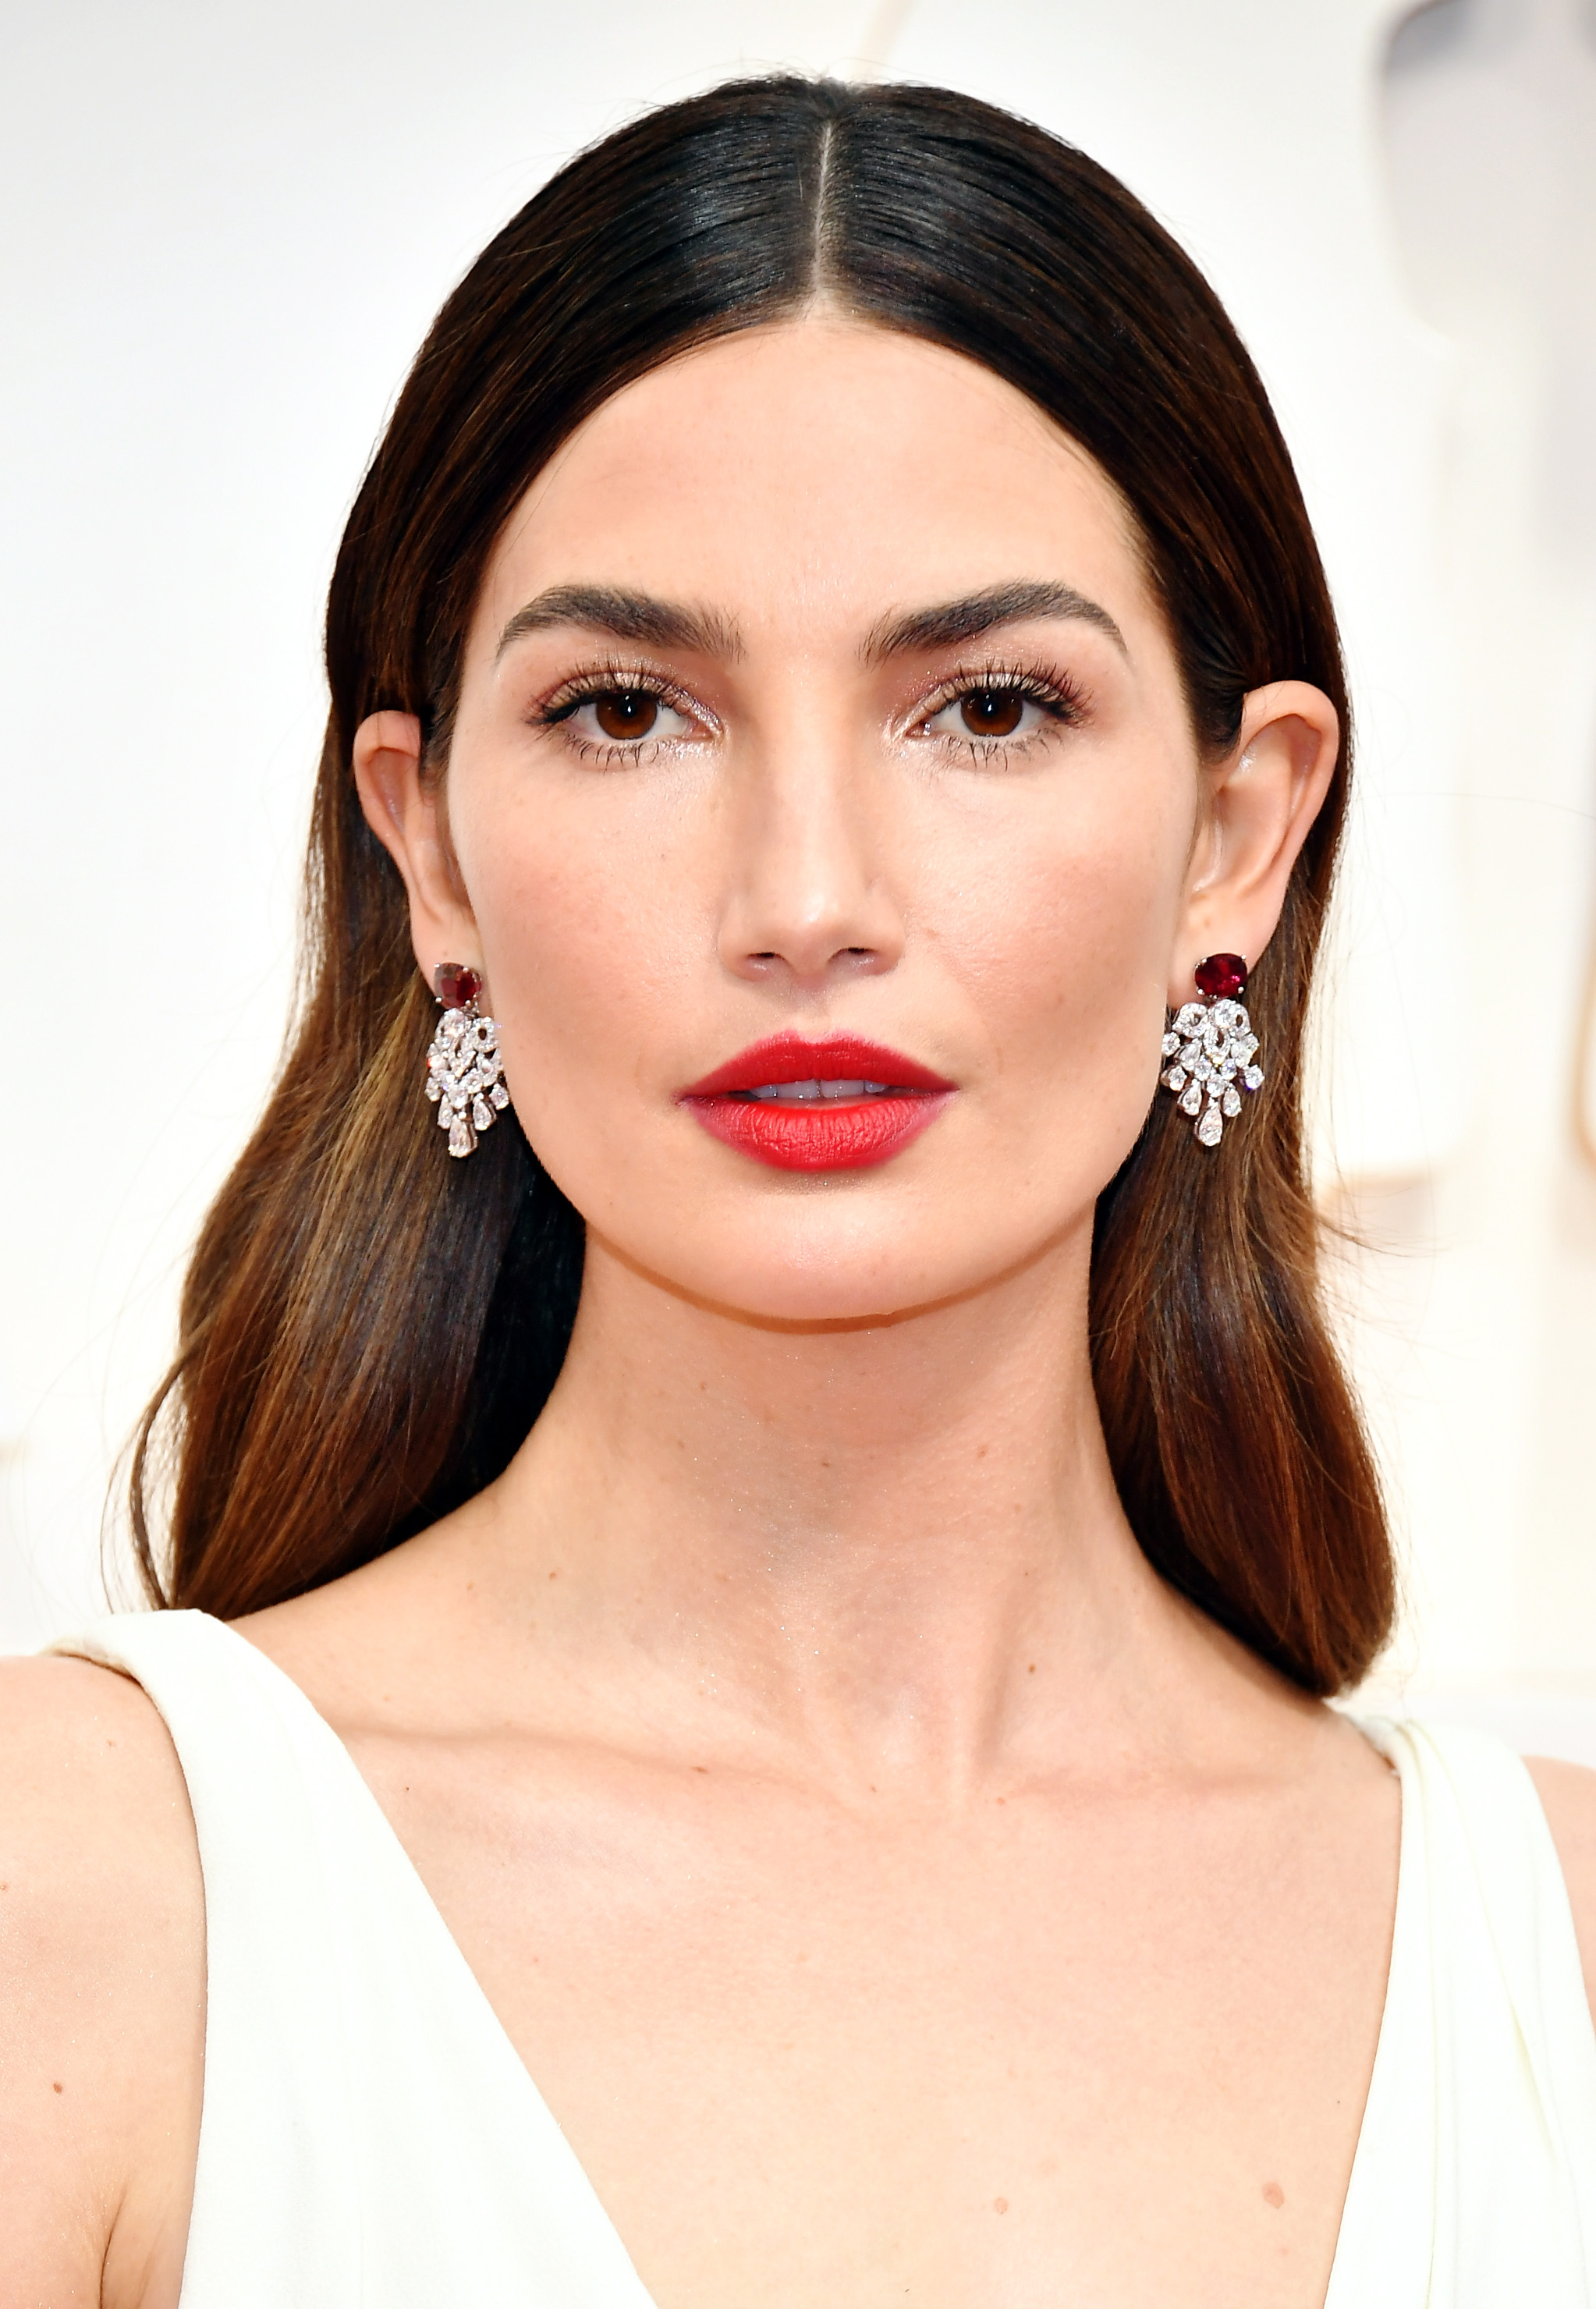 Lily Aldridge radiates with outstanding makeup style at the Oscar 2020 red carpet.